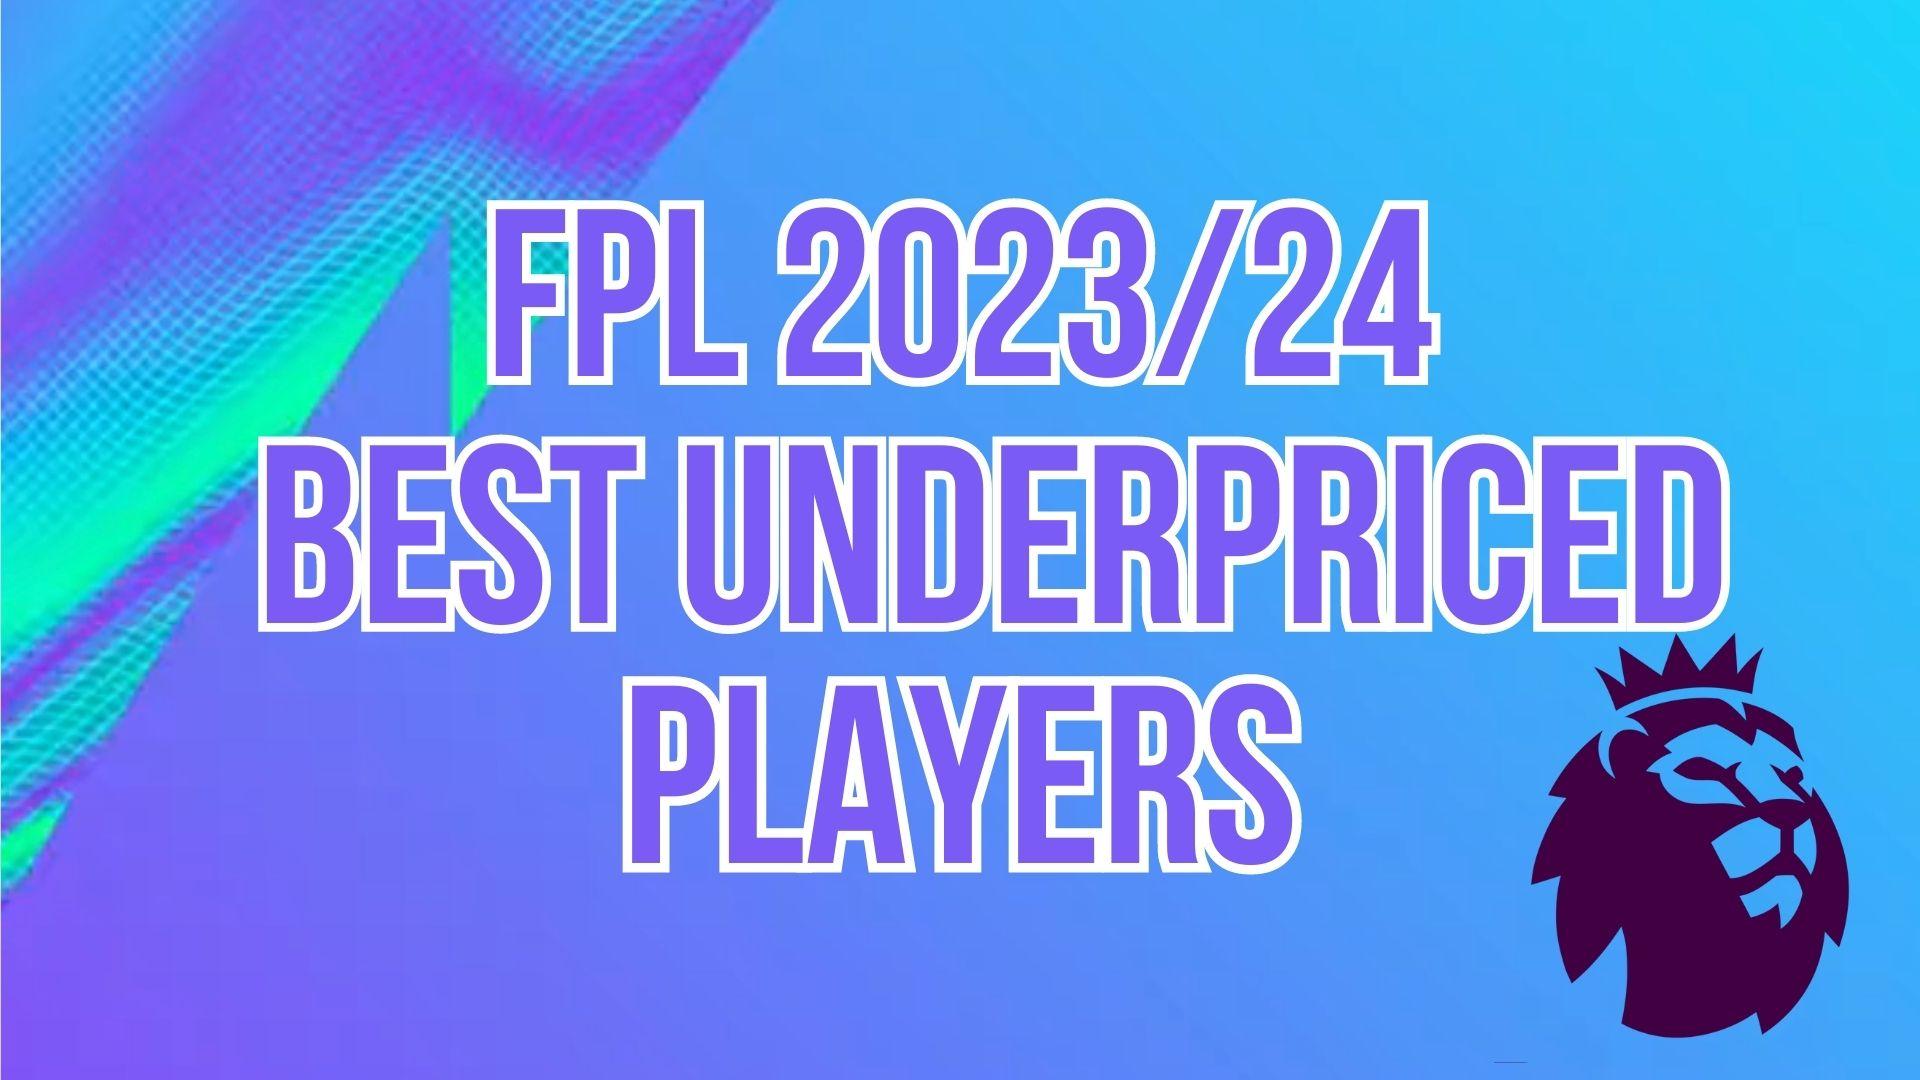 Premier League logo with best underpriced players text